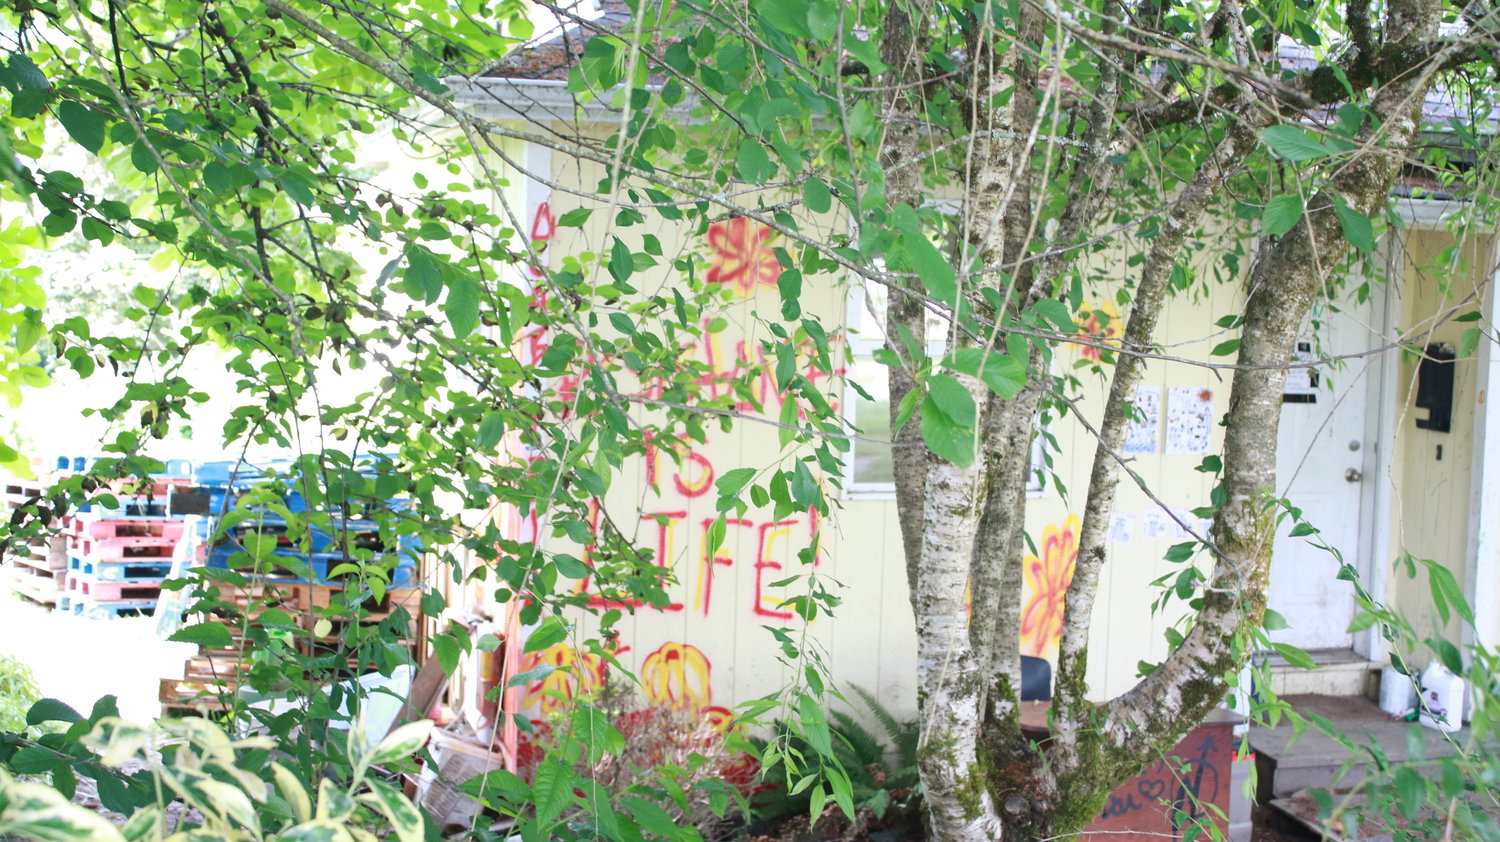 "Resistance is life" reads some of the graffiti on the house's exterior on June 4, 2021.